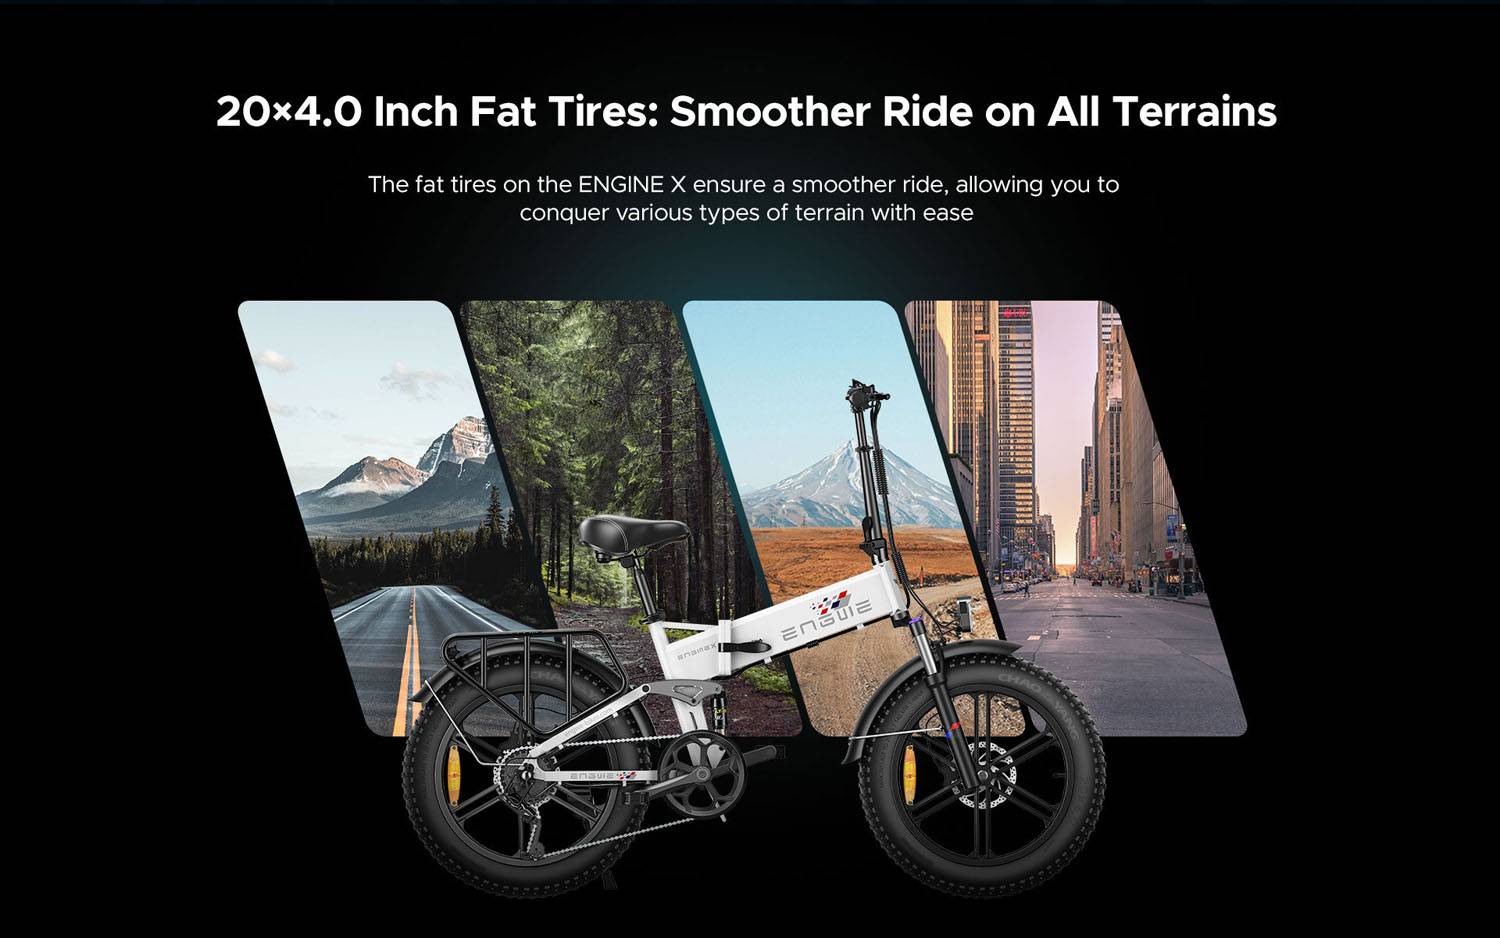 20×4.0 Inch Fat Tires: Smoother Ride On All Terrains